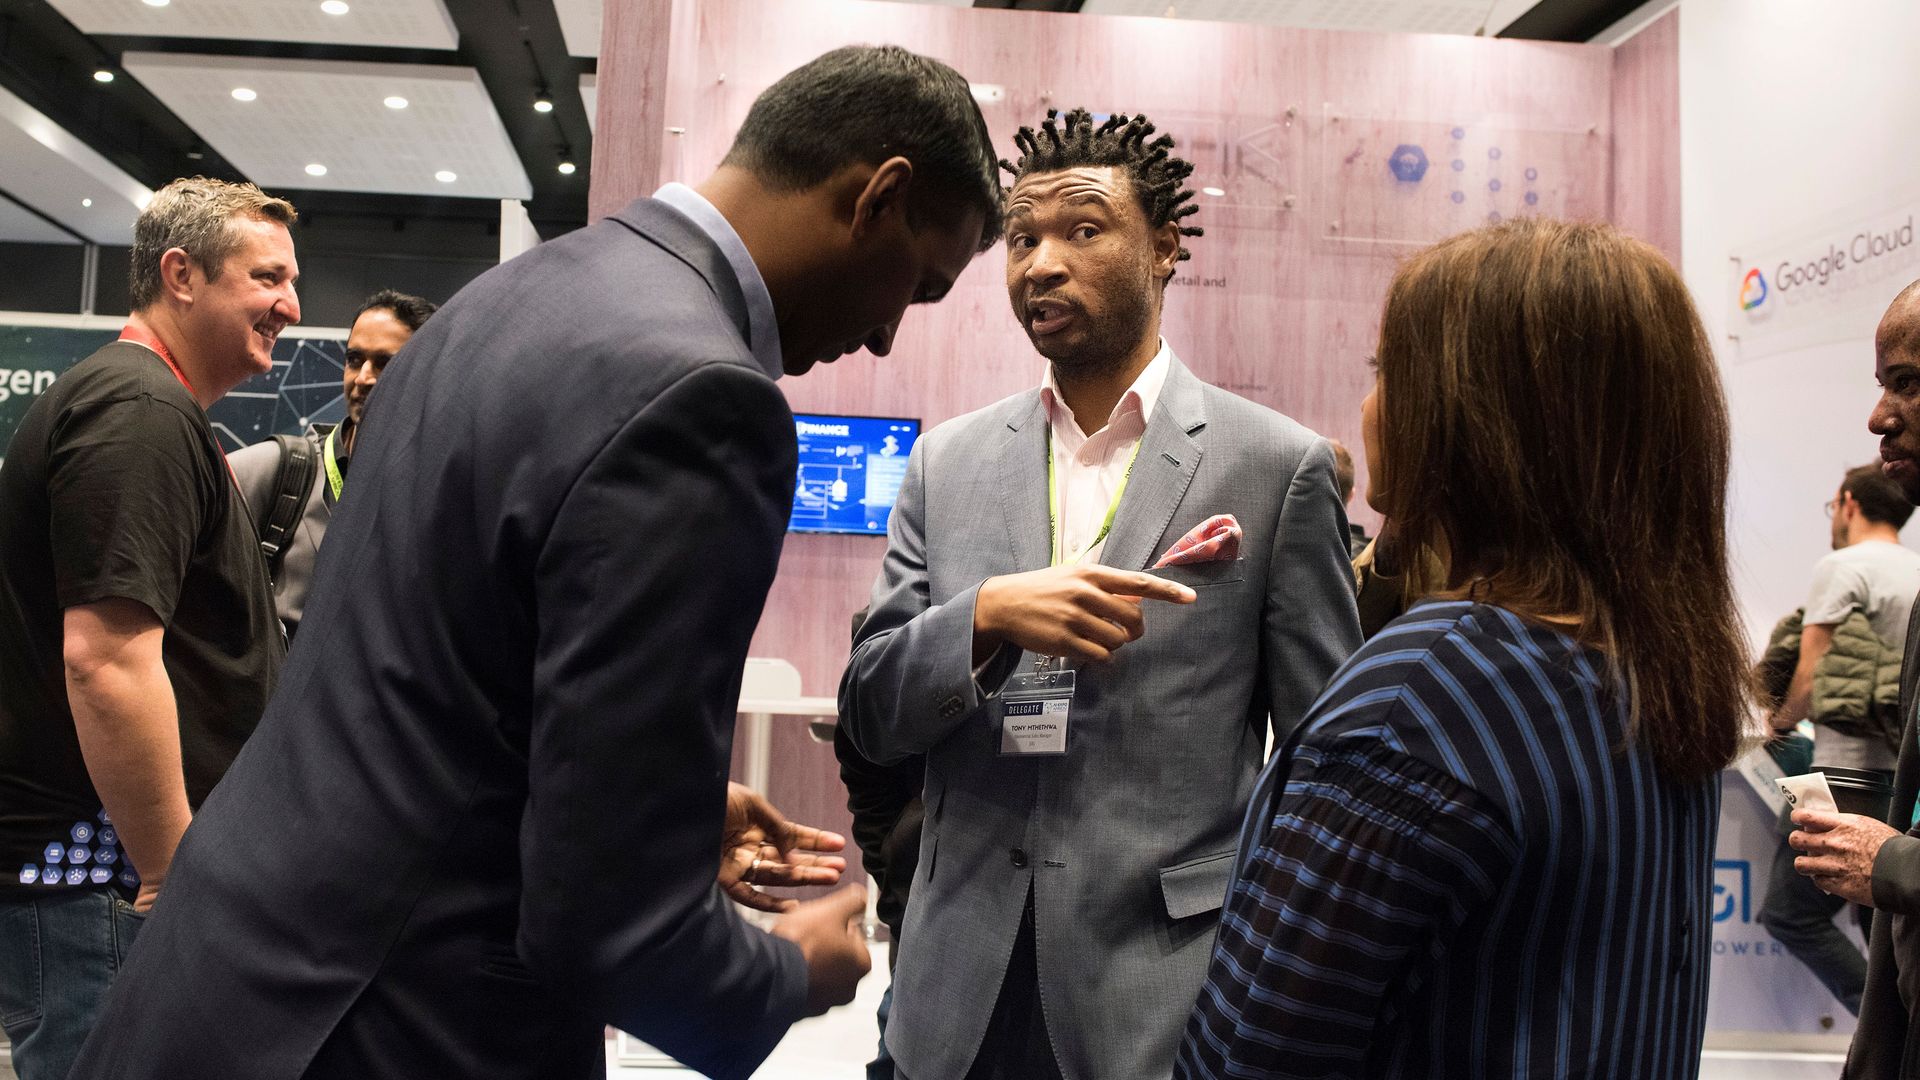 Delegates and exhibitors network and look at stands at the AI Expo Africa on September 10, 2018, at the Century City Conference Centre, in Cape Town.